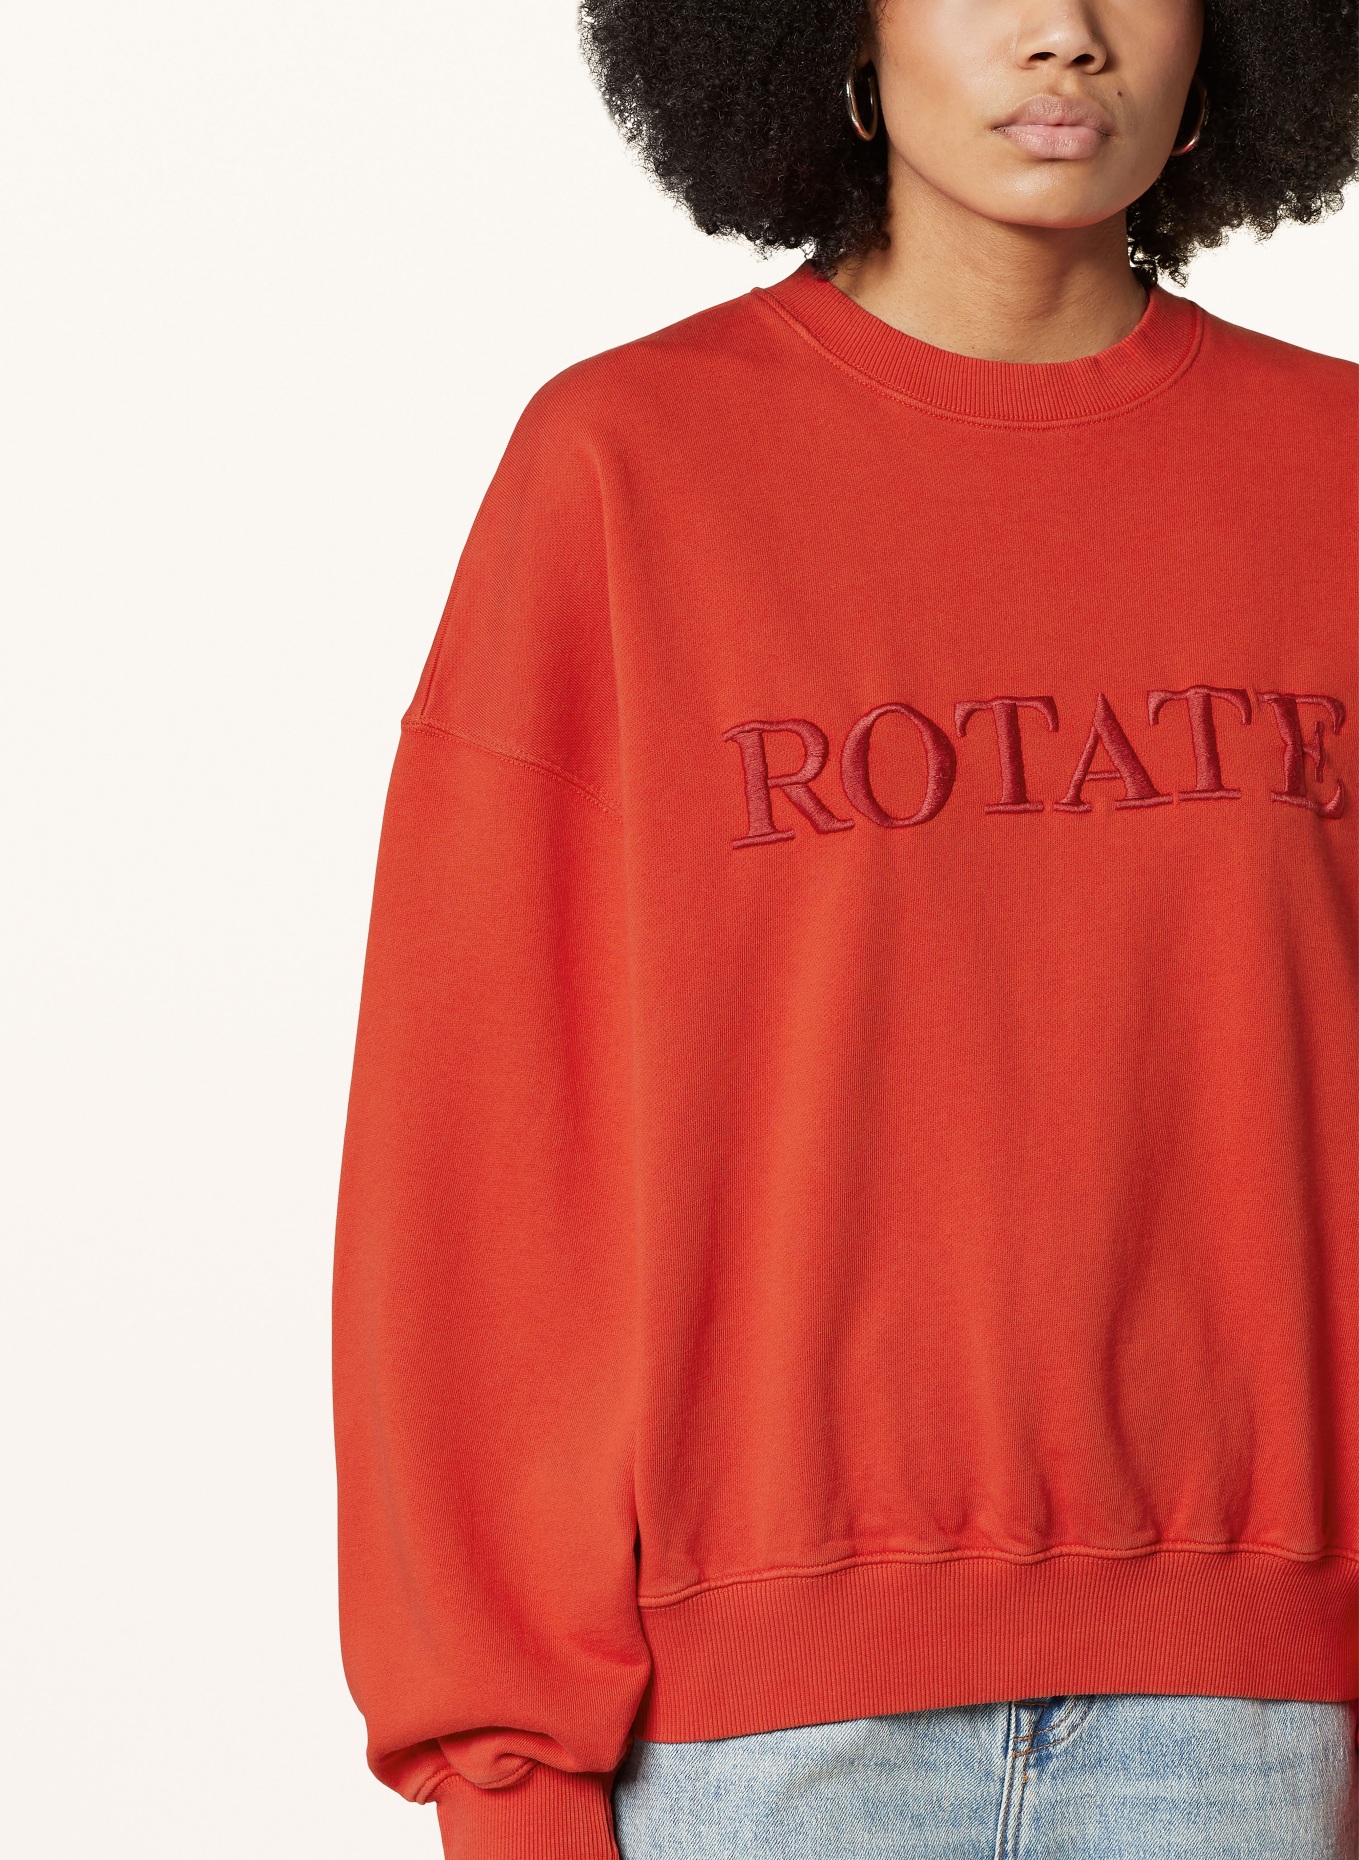 ROTATE Sweatshirt, Color: RED (Image 4)